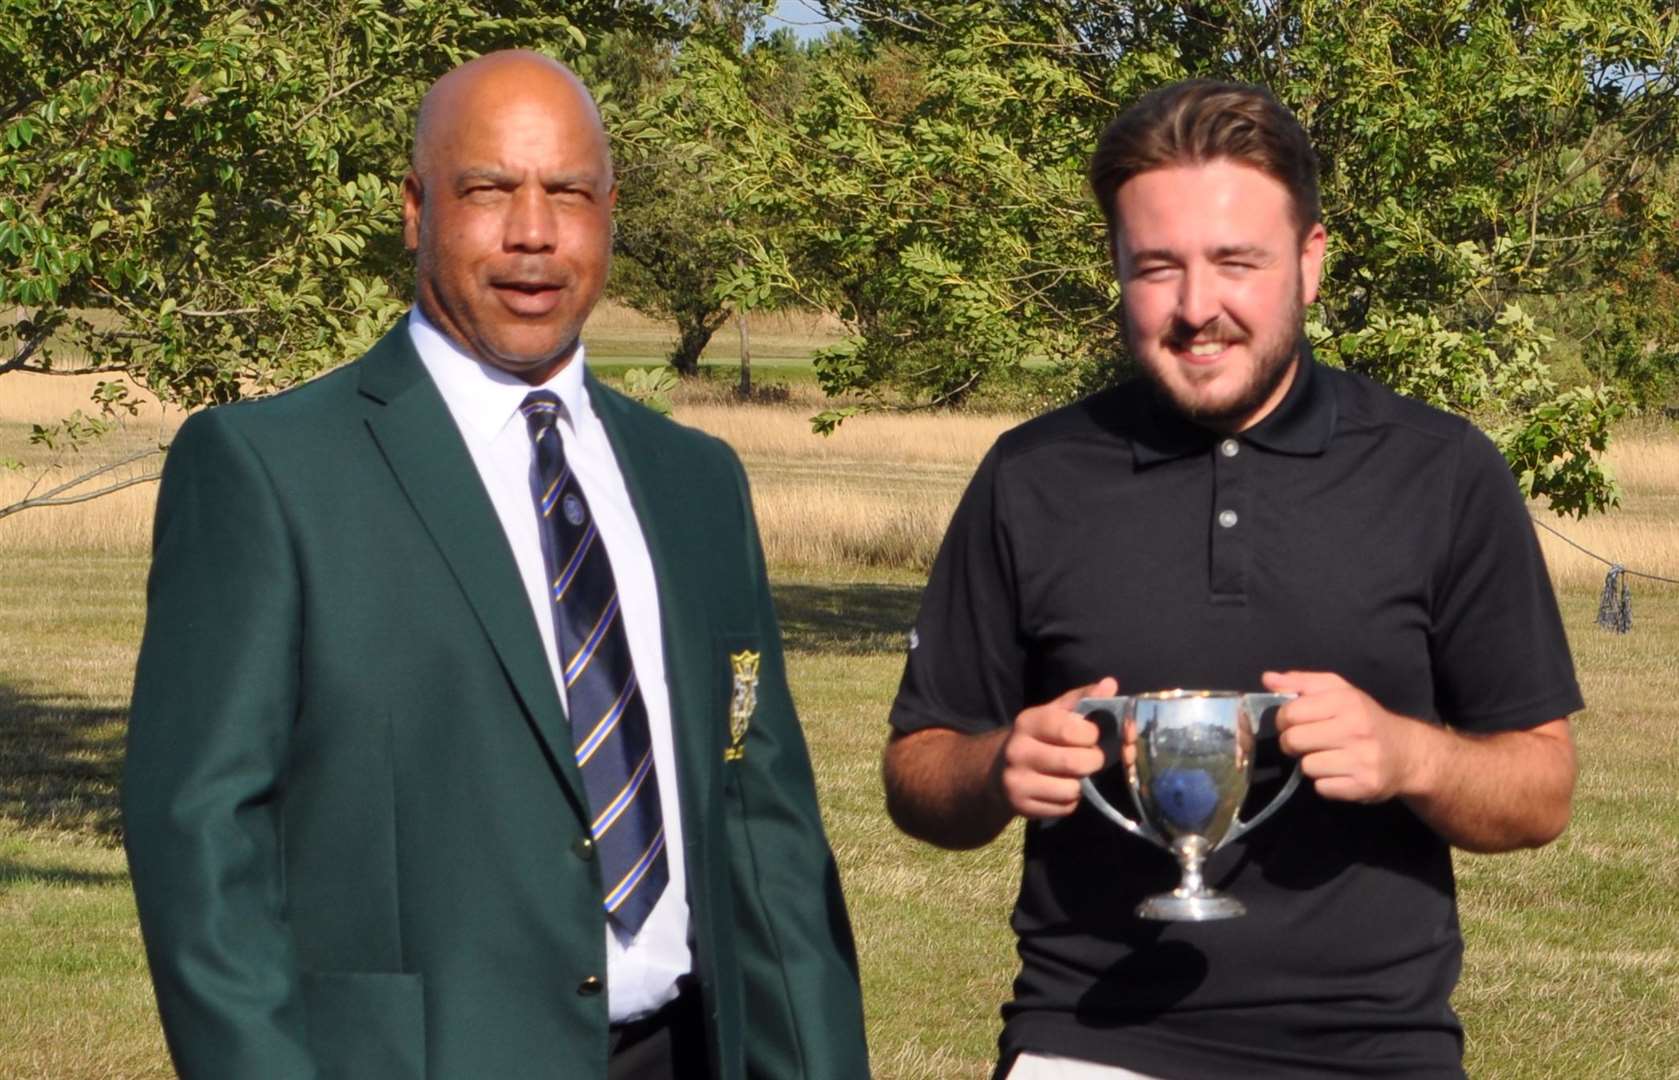 Ben Pullen is presented with the Sheerness Golf Club Championship earlier this year.